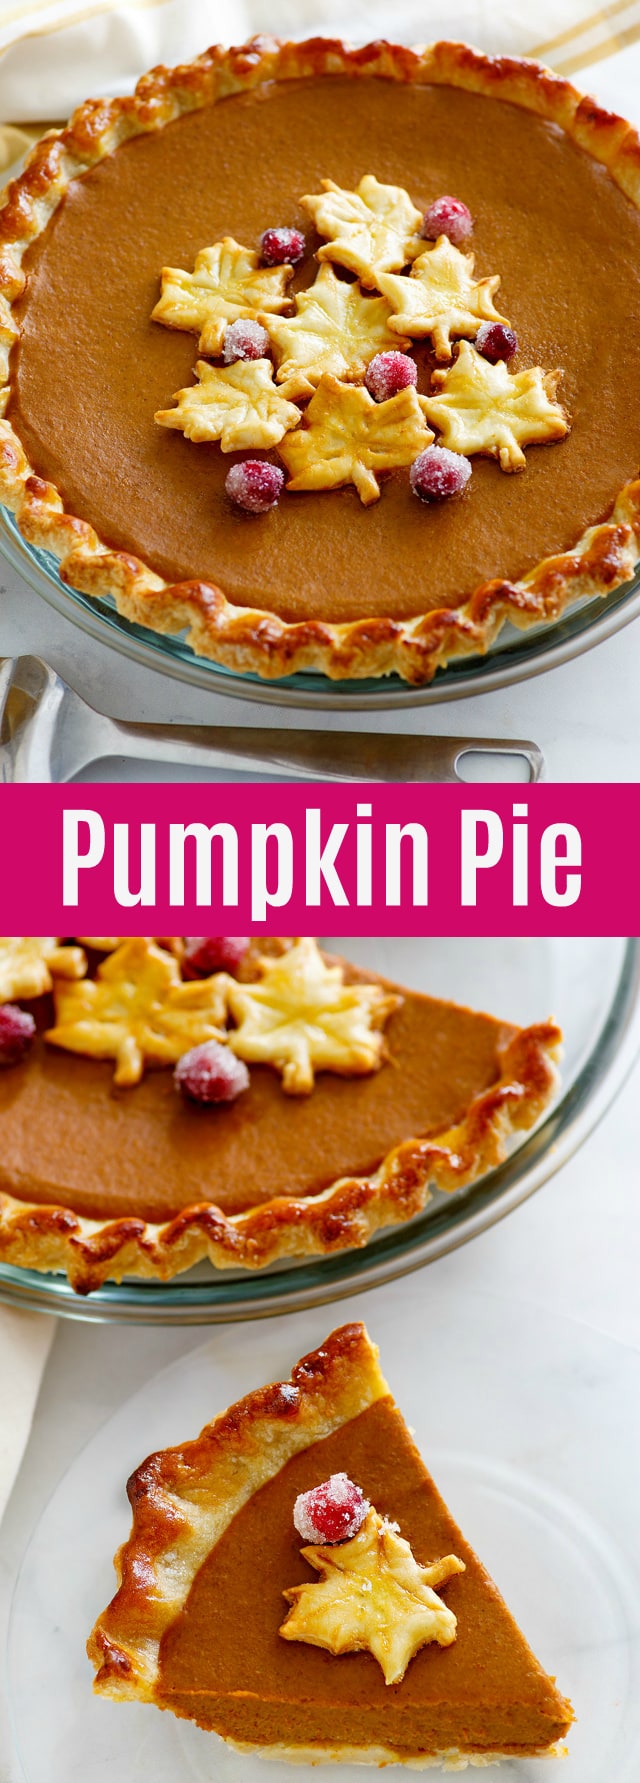 Classic Pumpkin Pie - easy recipe for homemade pumpkin pie.  This traditional holiday pumpkin pie recipe is  easy to prepare and perfect for the holidays!